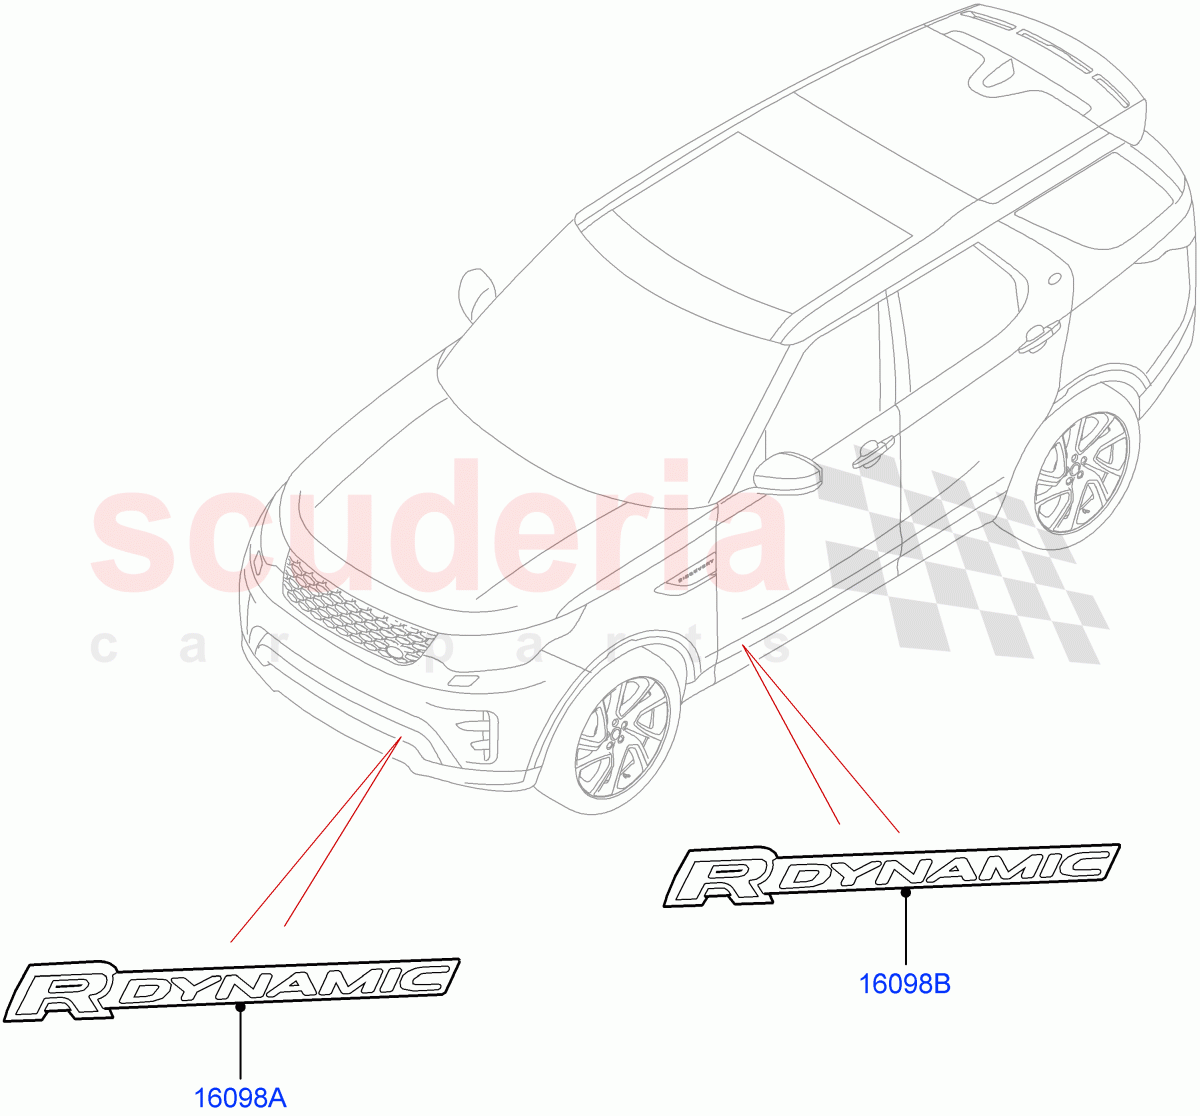 Name Plates(Nitra Plant Build)(Version - R-Dynamic)((V)FROMM2000001) of Land Rover Land Rover Discovery 5 (2017+) [2.0 Turbo Petrol AJ200P]